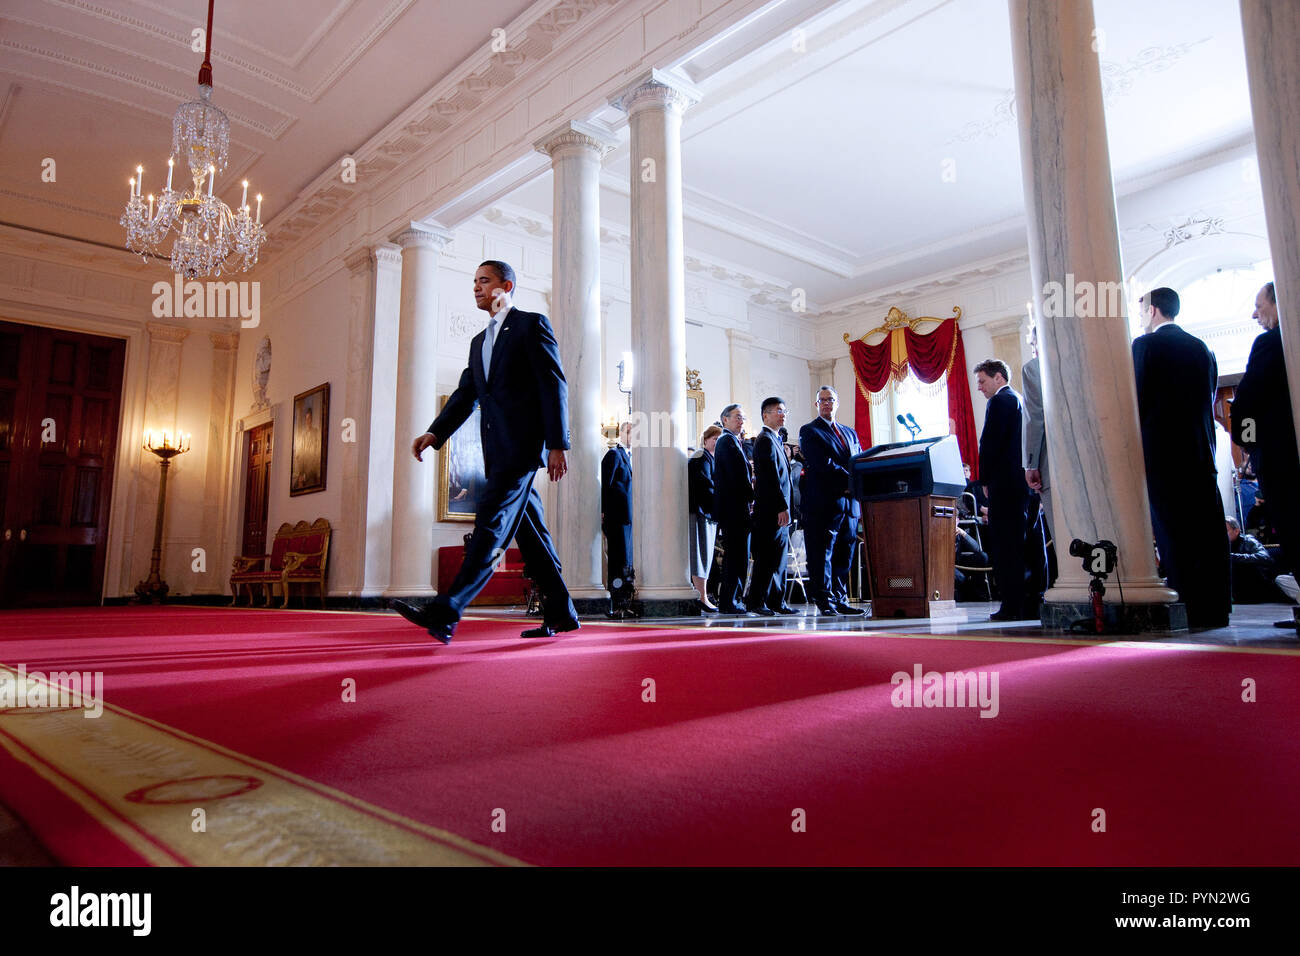 President Barack Obama walks away from the podium after delivering a statement regarding the American auto industry in the Cross Hall, Grand Foyer of the White House. Stock Photo